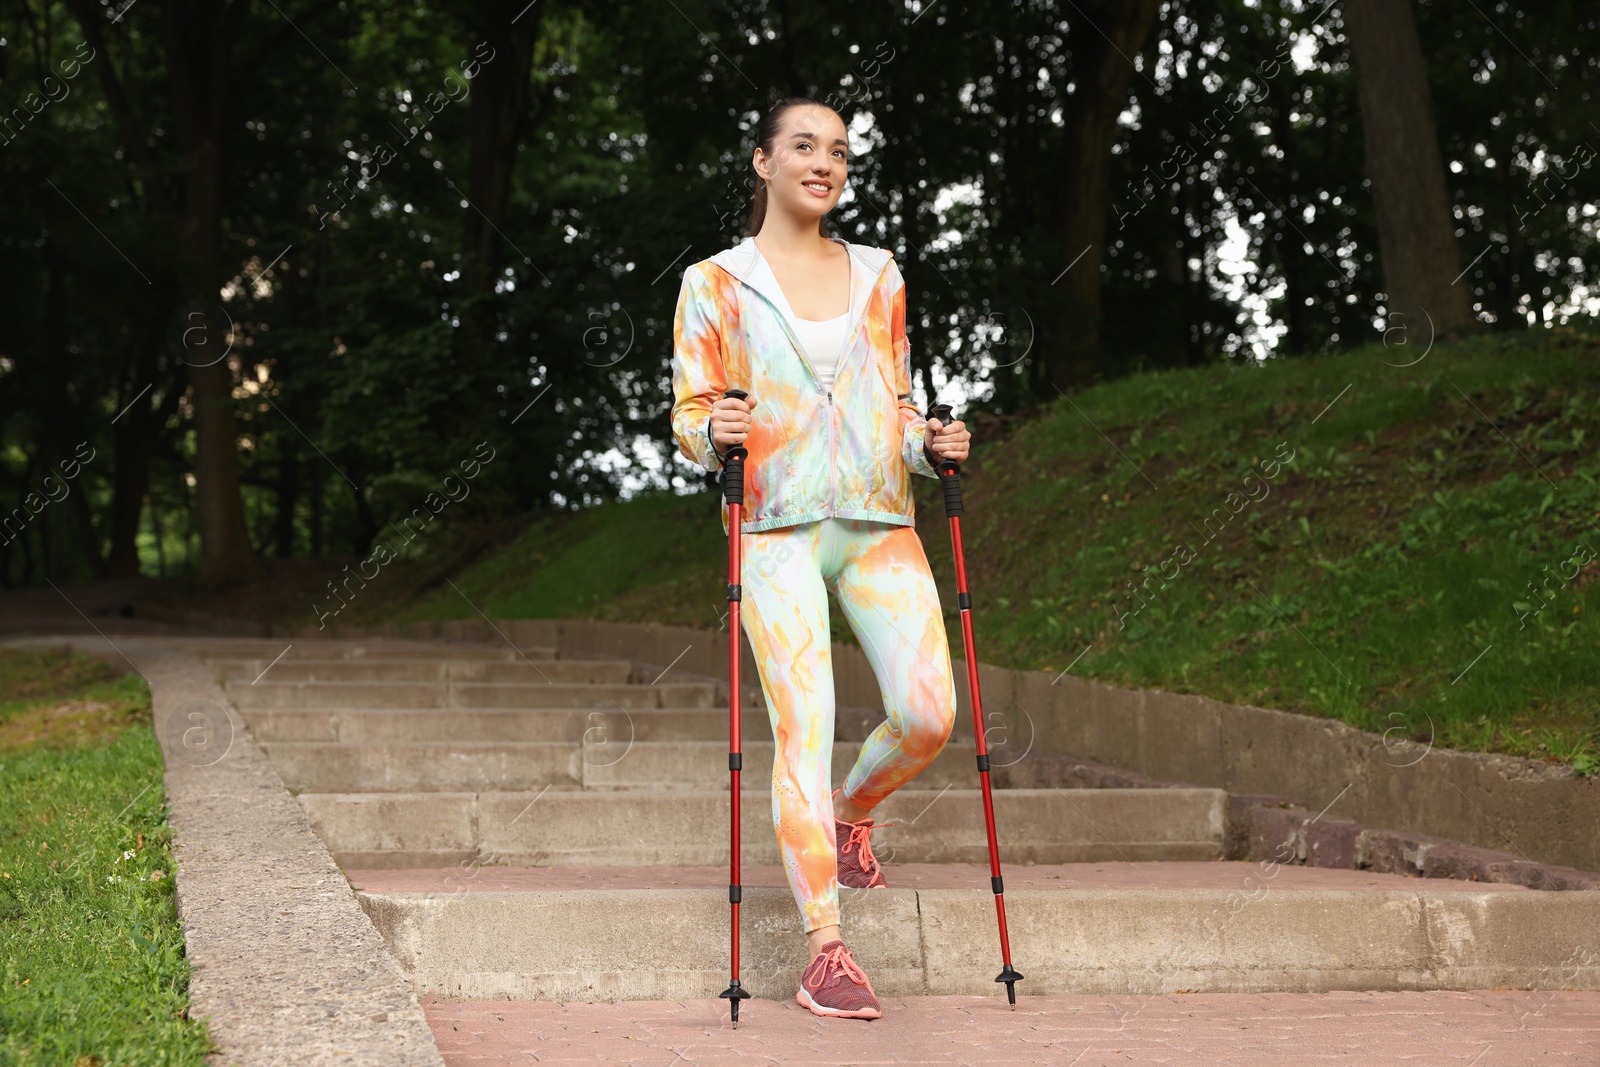 Photo of Young woman practicing Nordic walking with poles on steps outdoors